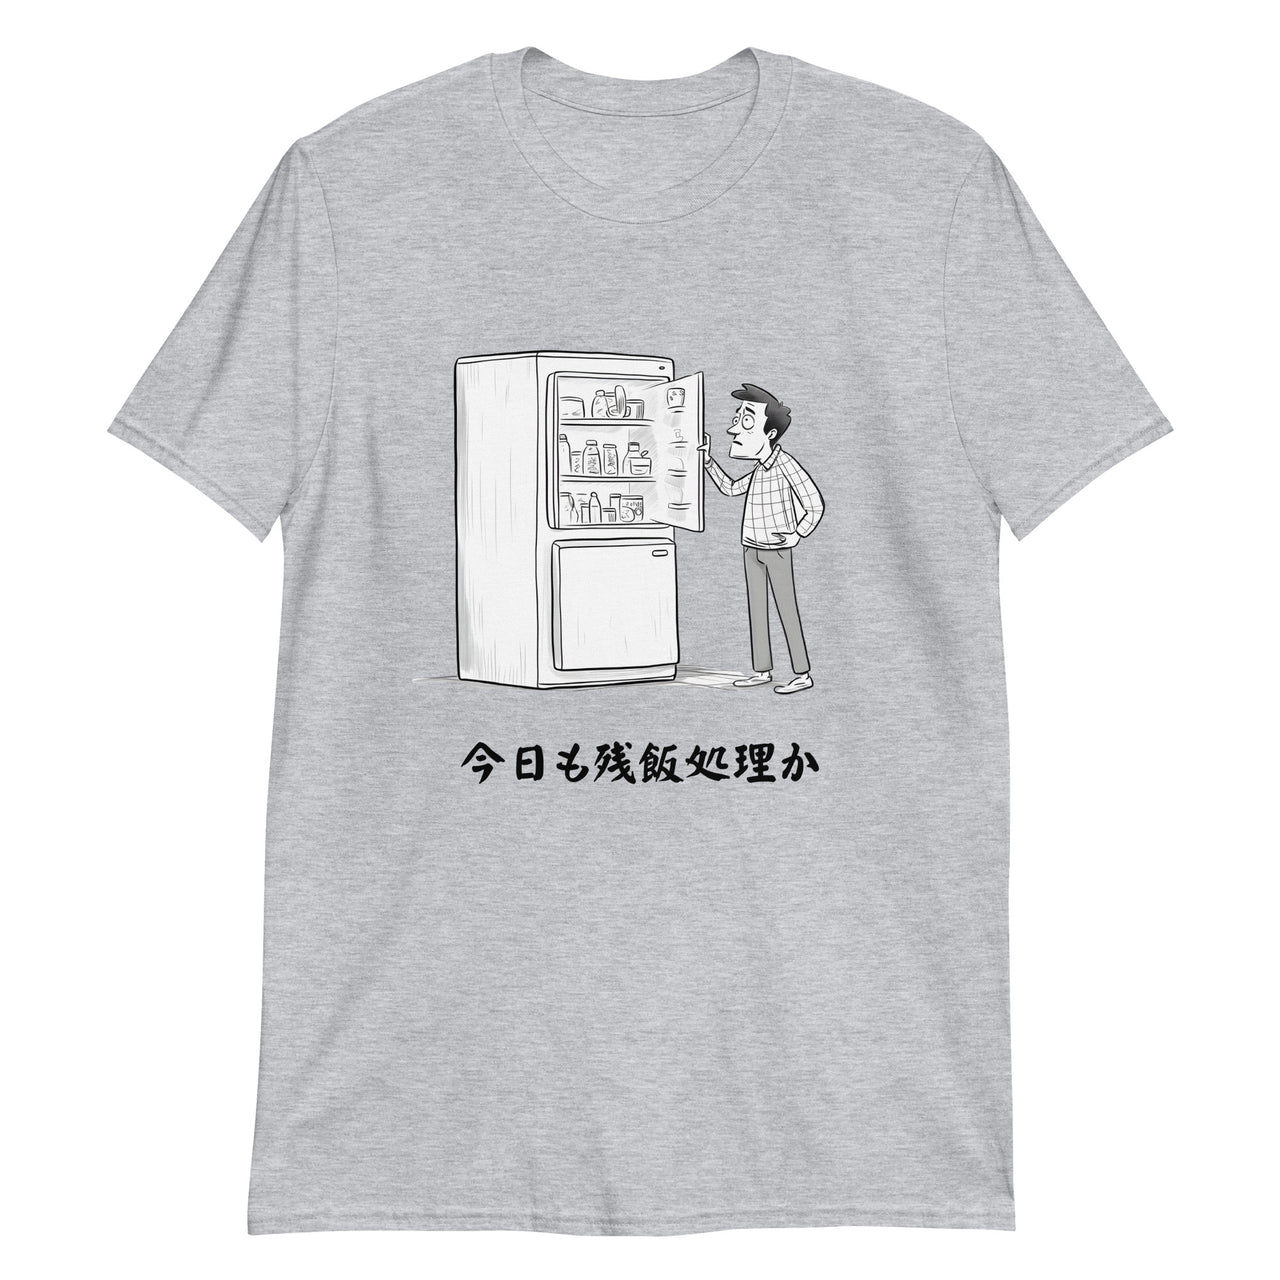 Today is Also Leftovers in Japanese T-Shirt